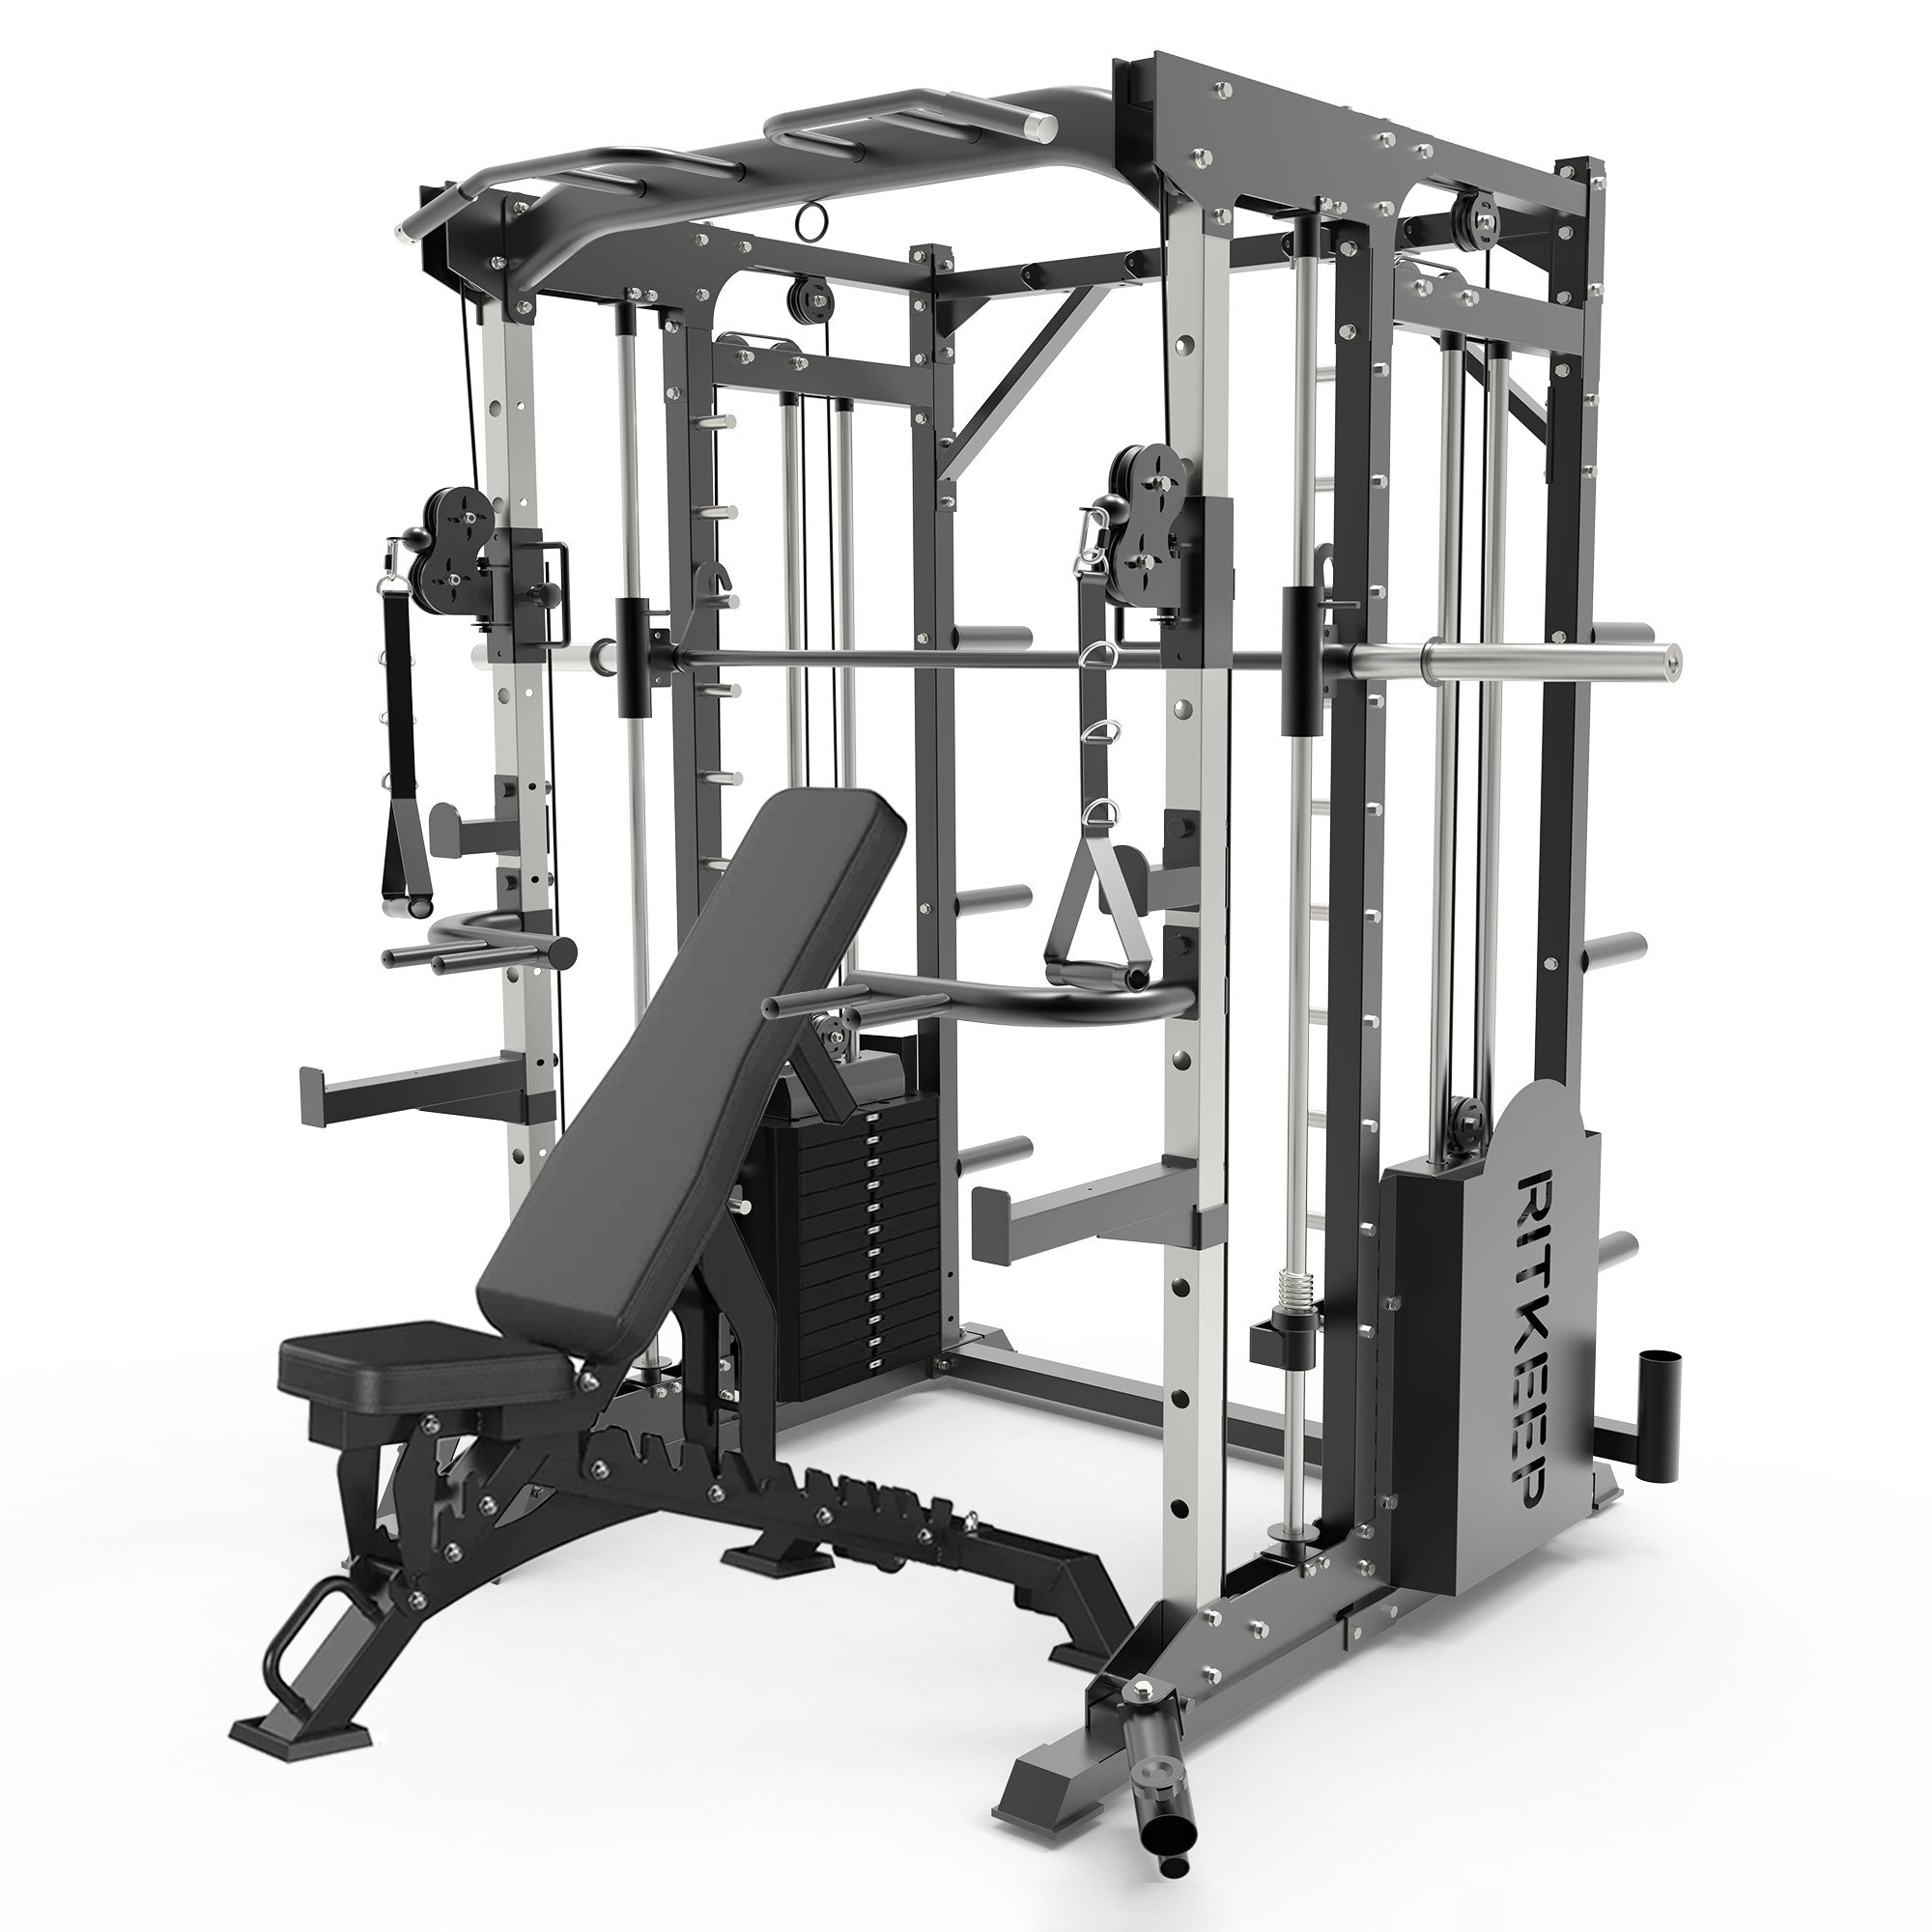 PMAX-5600 Smith Machine Trainer With Weight Stack